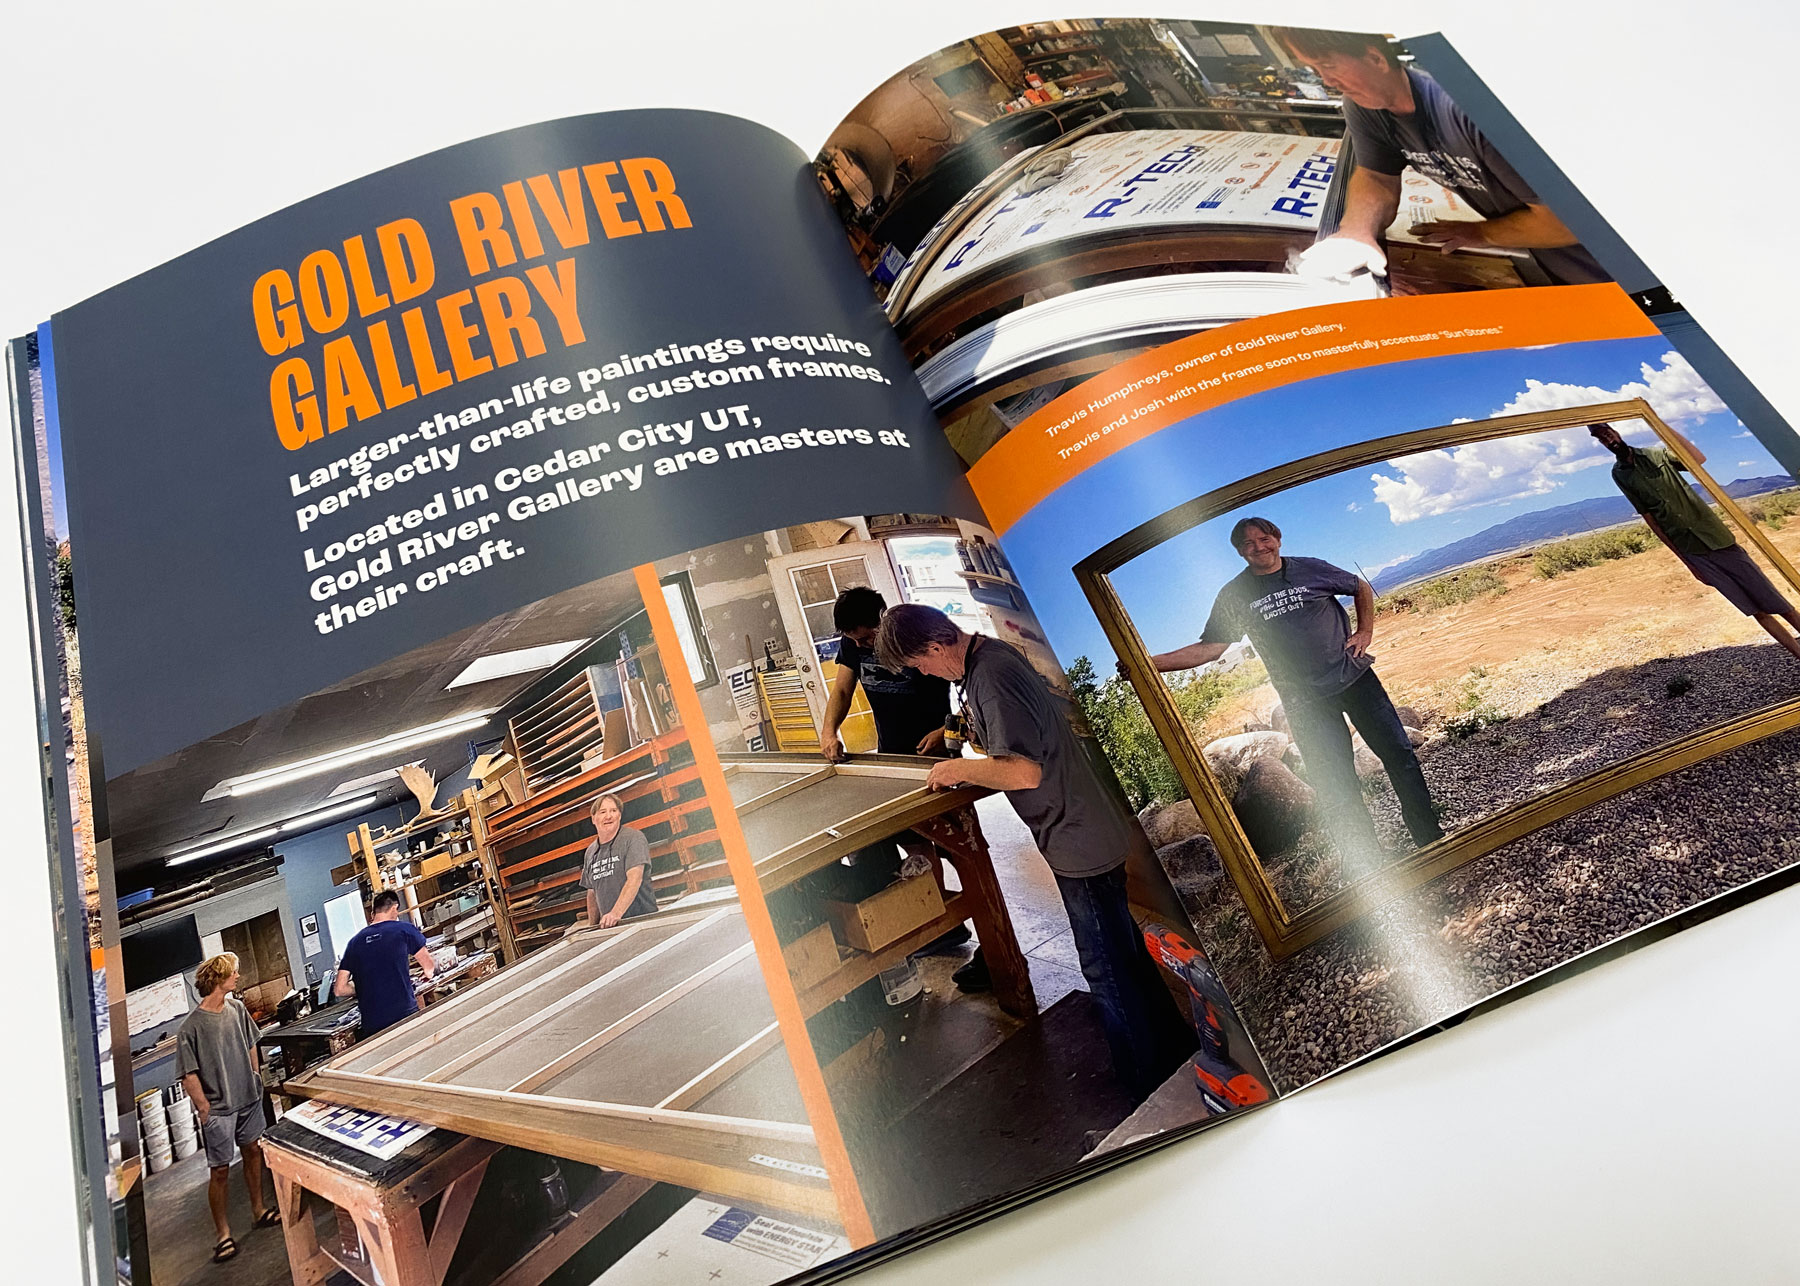 A spread about the framing process for the exhibition featuring Gold River Gallery.